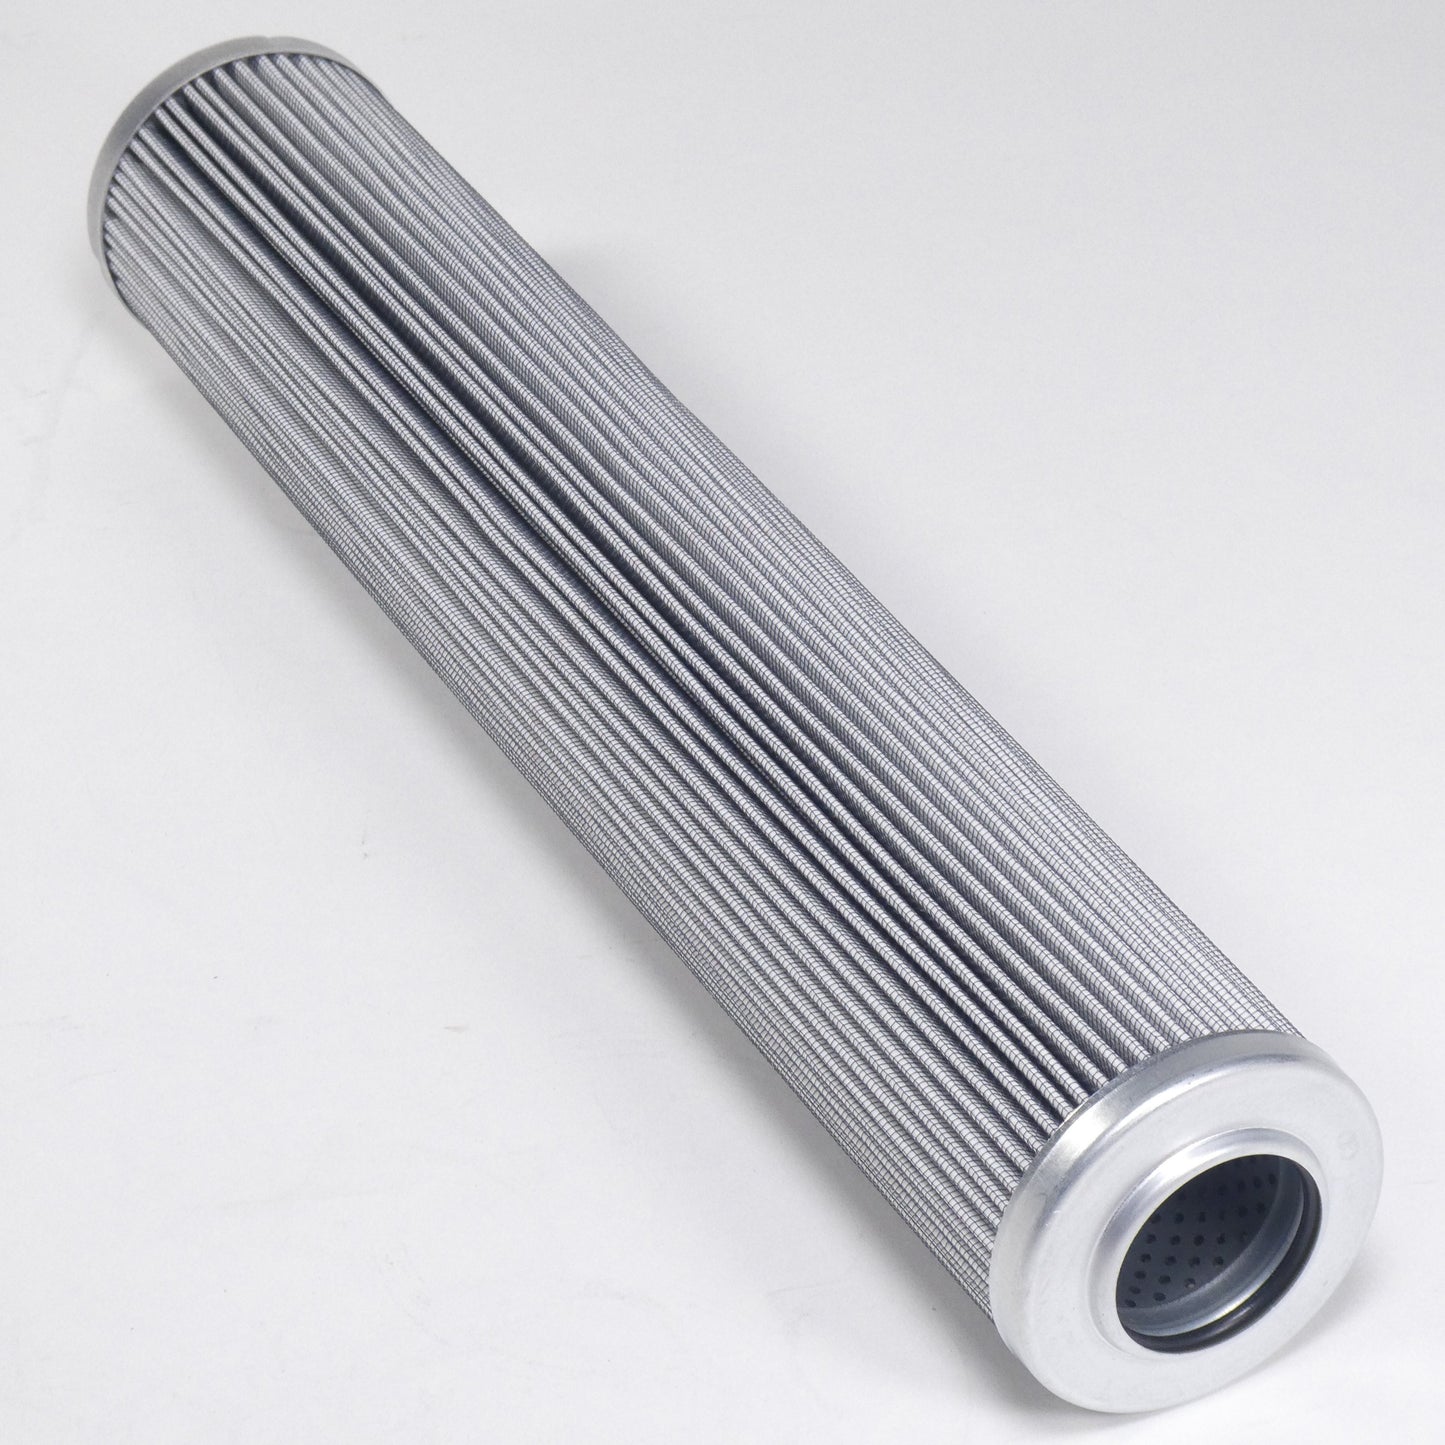 Hydrafil Replacement Filter Element for Mahle 932.680.4